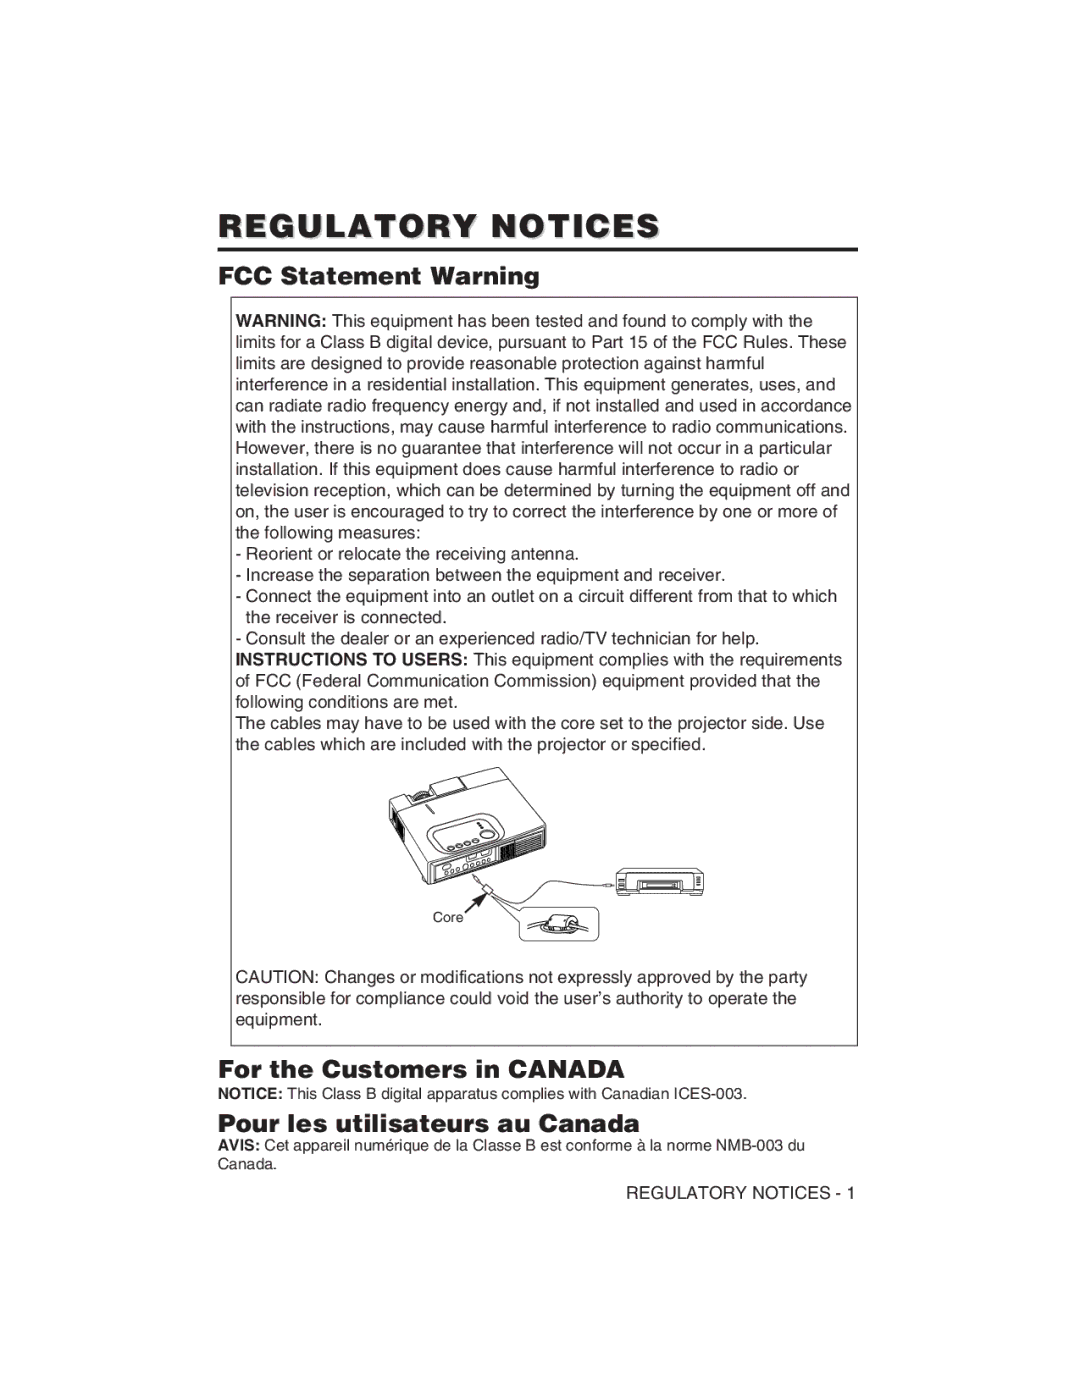 Hitachi CP-S225W Regulatory Notices, FCC Statement Warning, For the Customers in Canada Pour les utilisateurs au Canada 